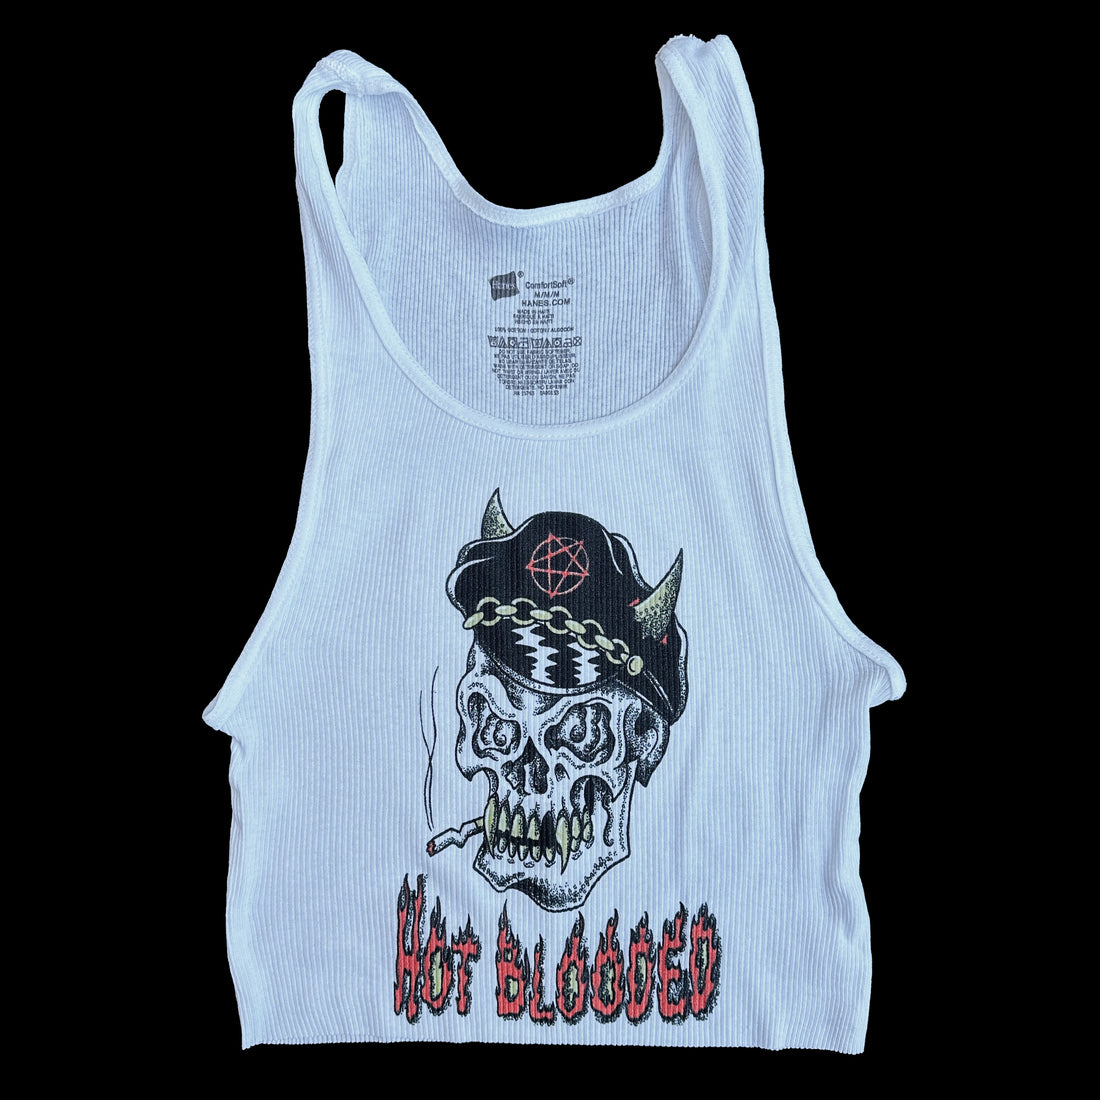 HOT BLOODED TANK